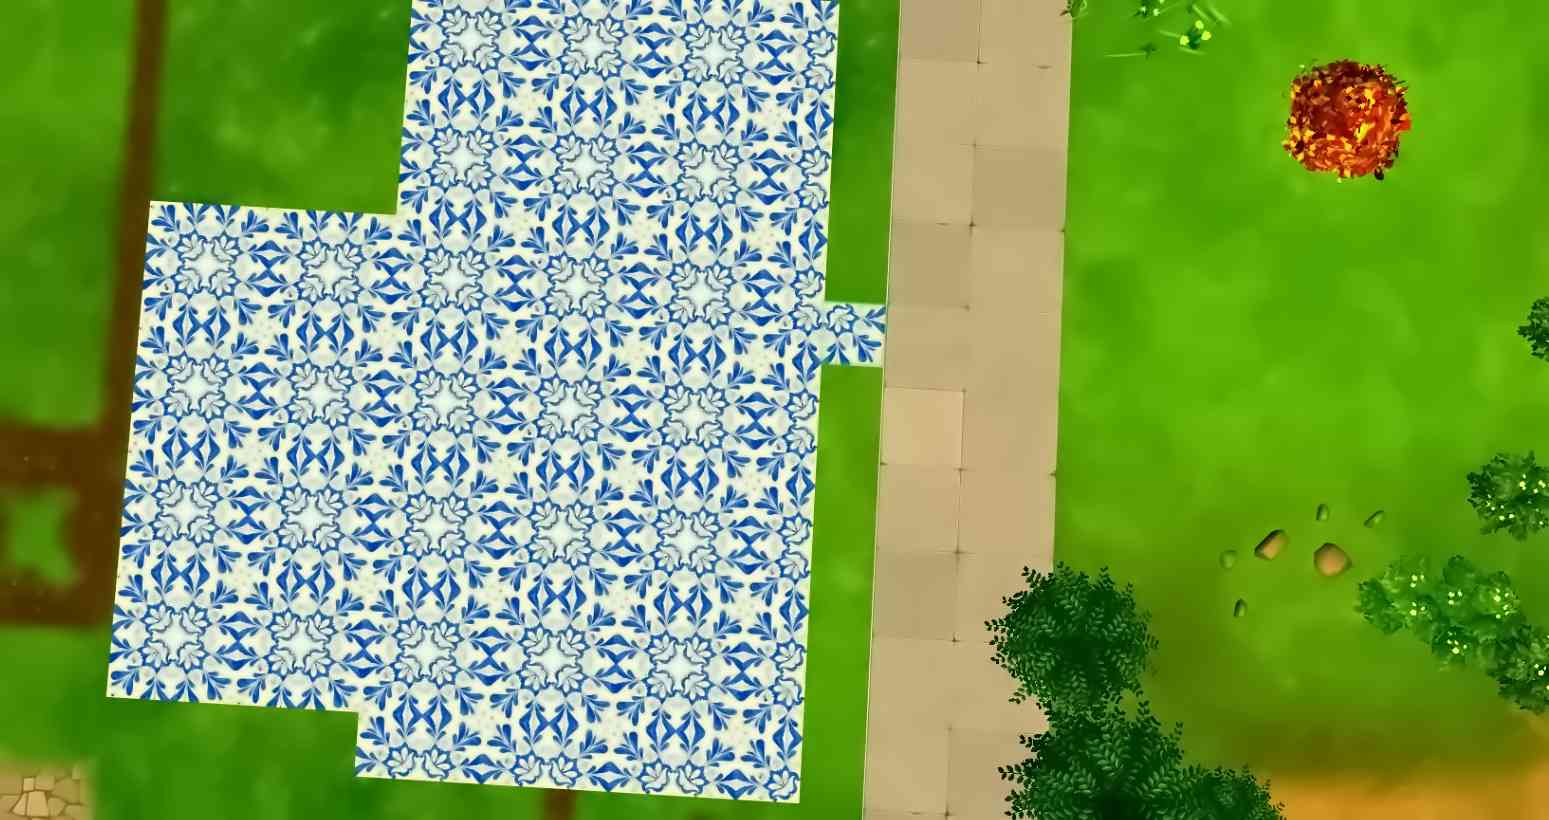 Sims 4: How to make your own CC floors in under 10 minutes